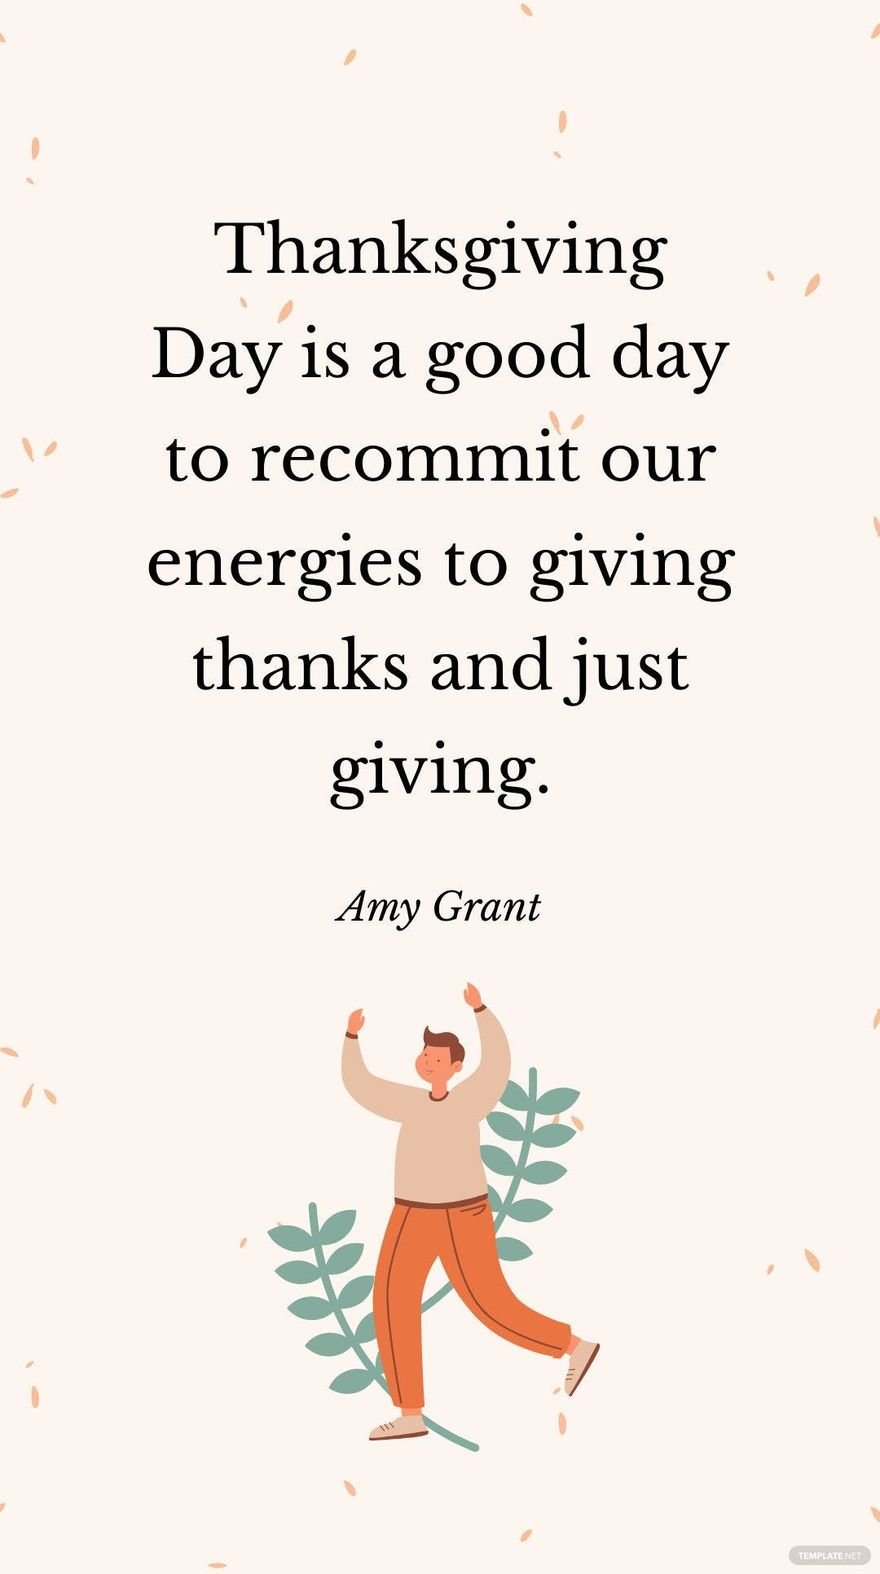 Free Amy Grant - Thanksgiving Day is a good day to recommit our energies to giving thanks and just giving.